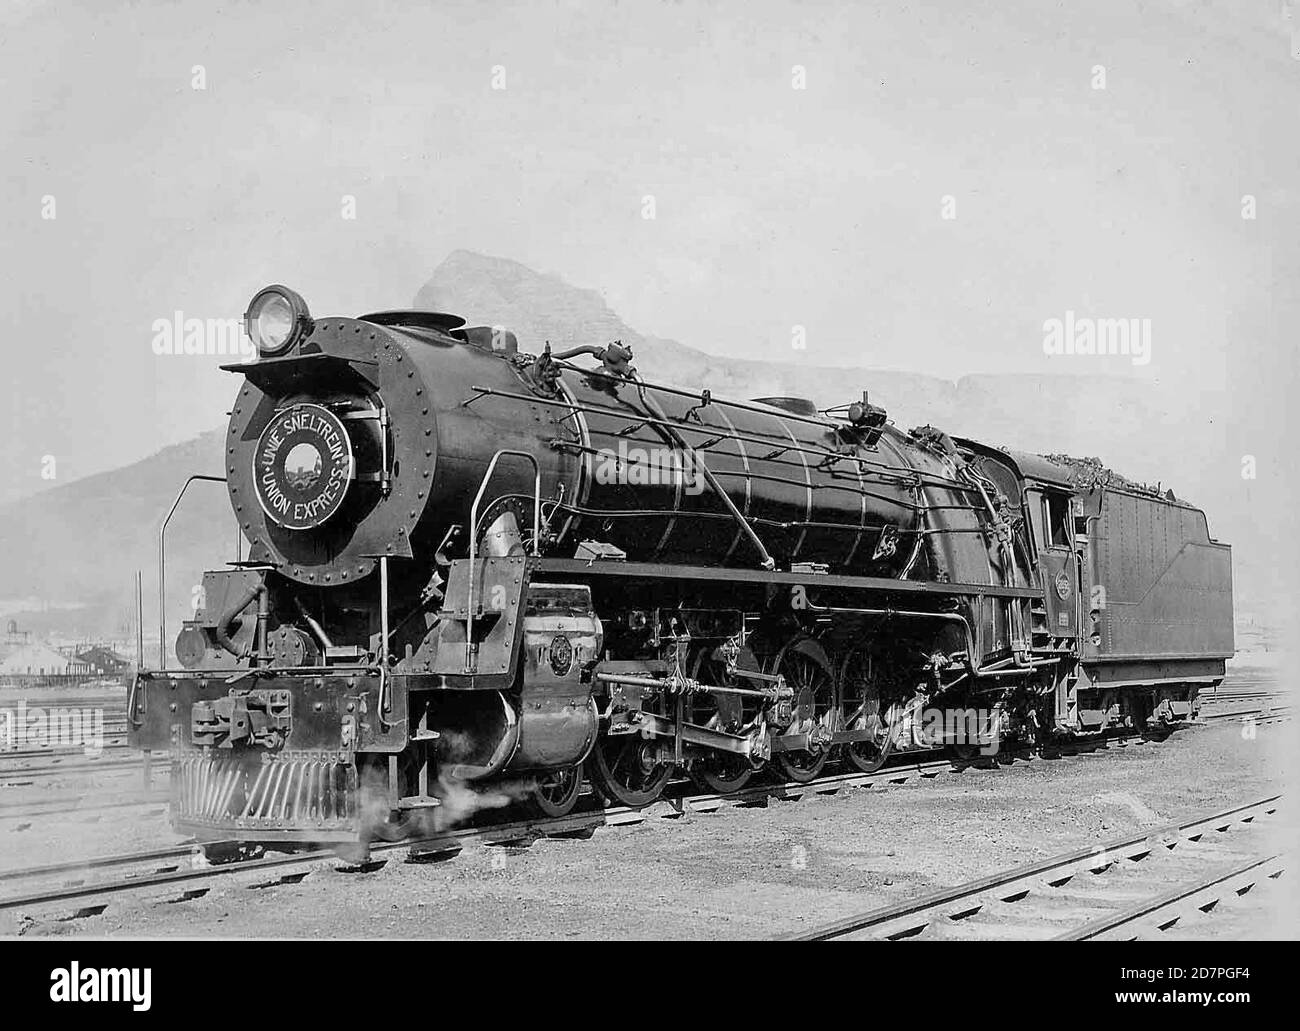 South Africa History: Class 15E 2897 (4-8-2)Location: Berliner built ...